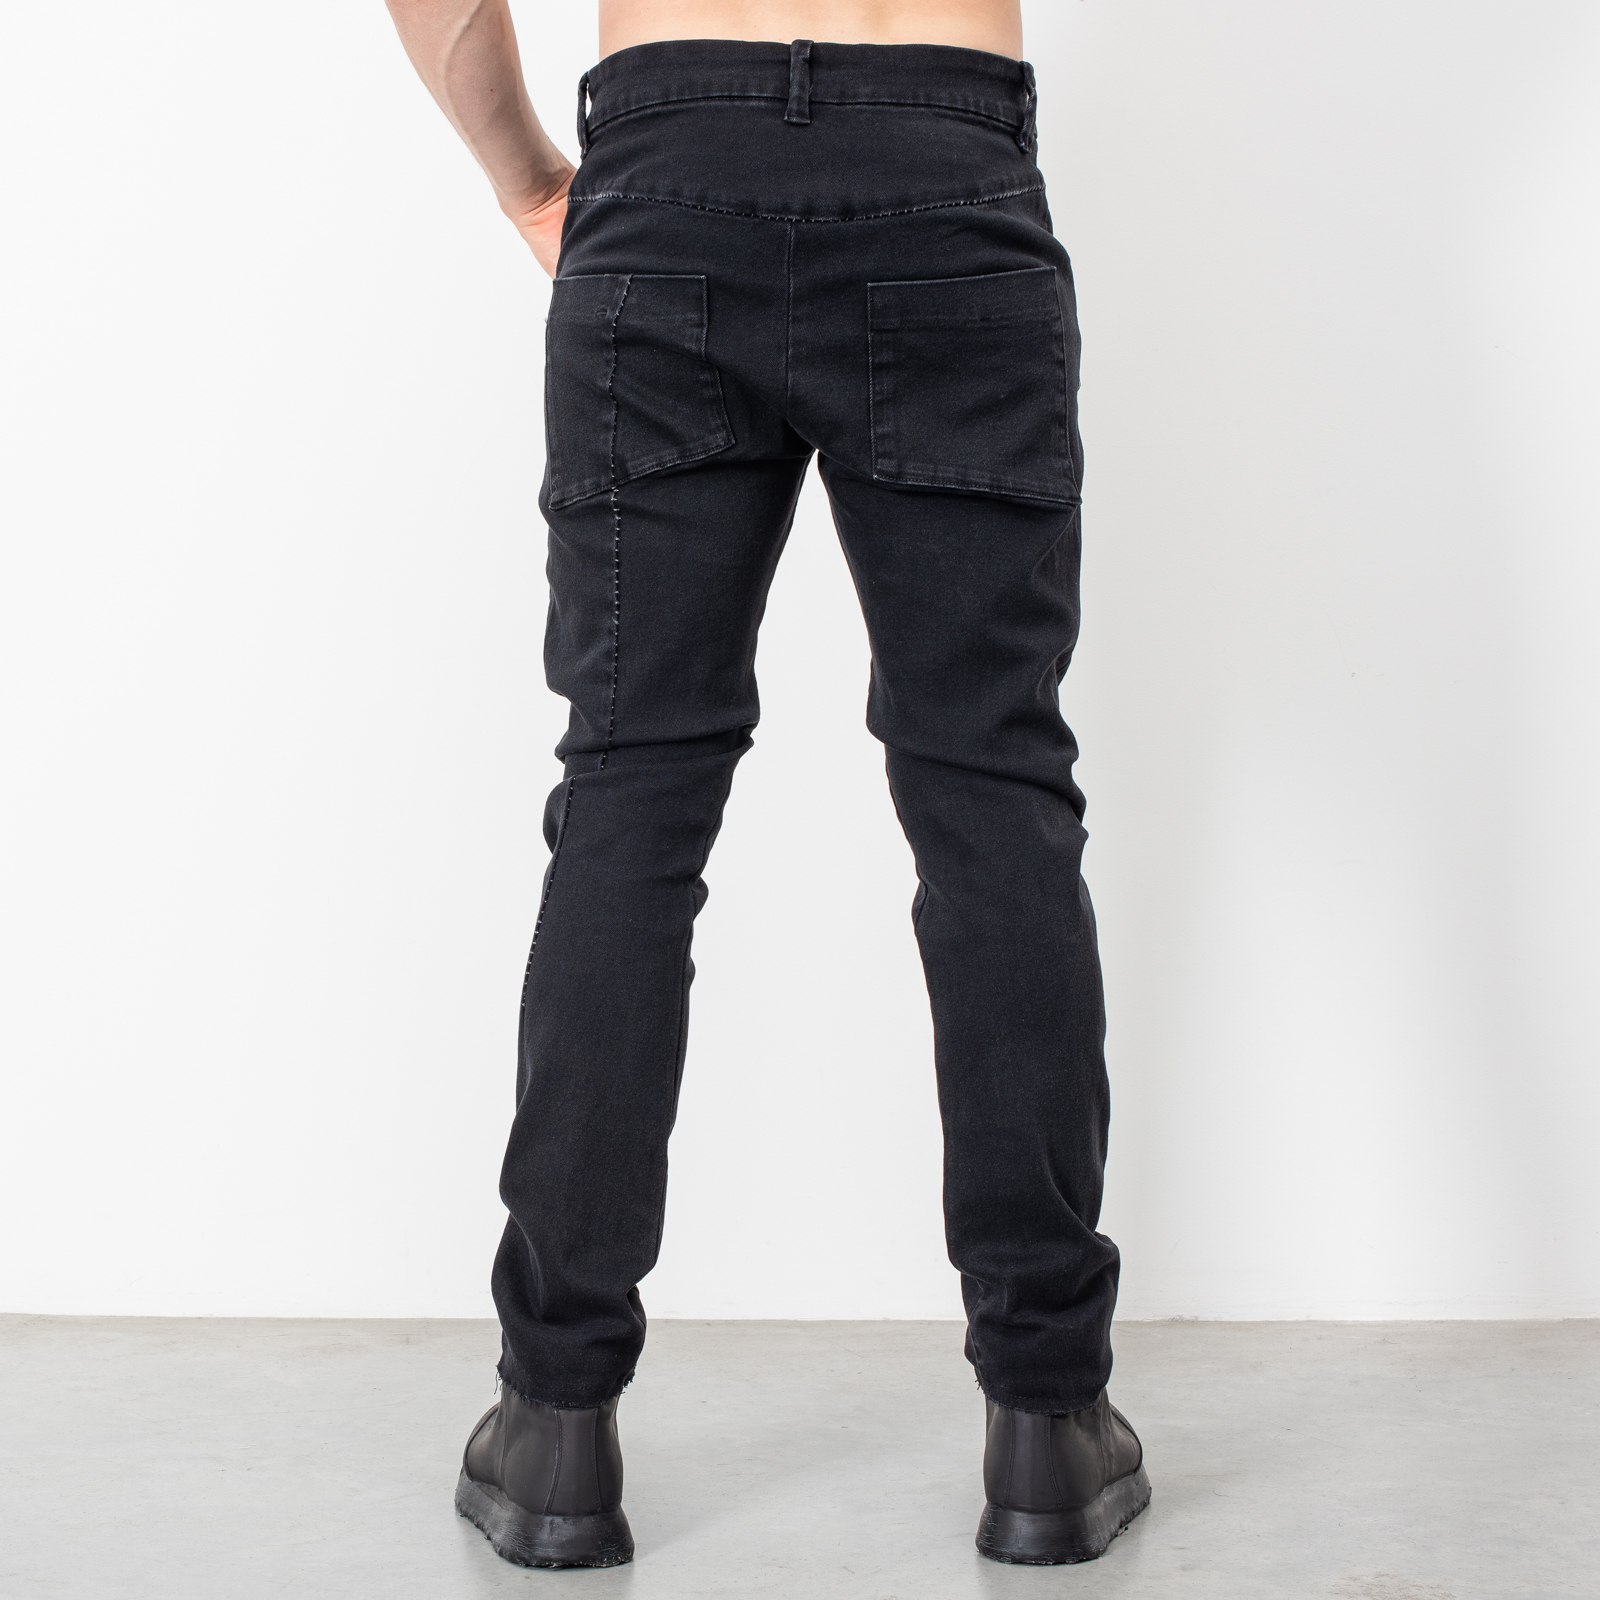 BLACK TIGHT FIT JEANS|wolfensson